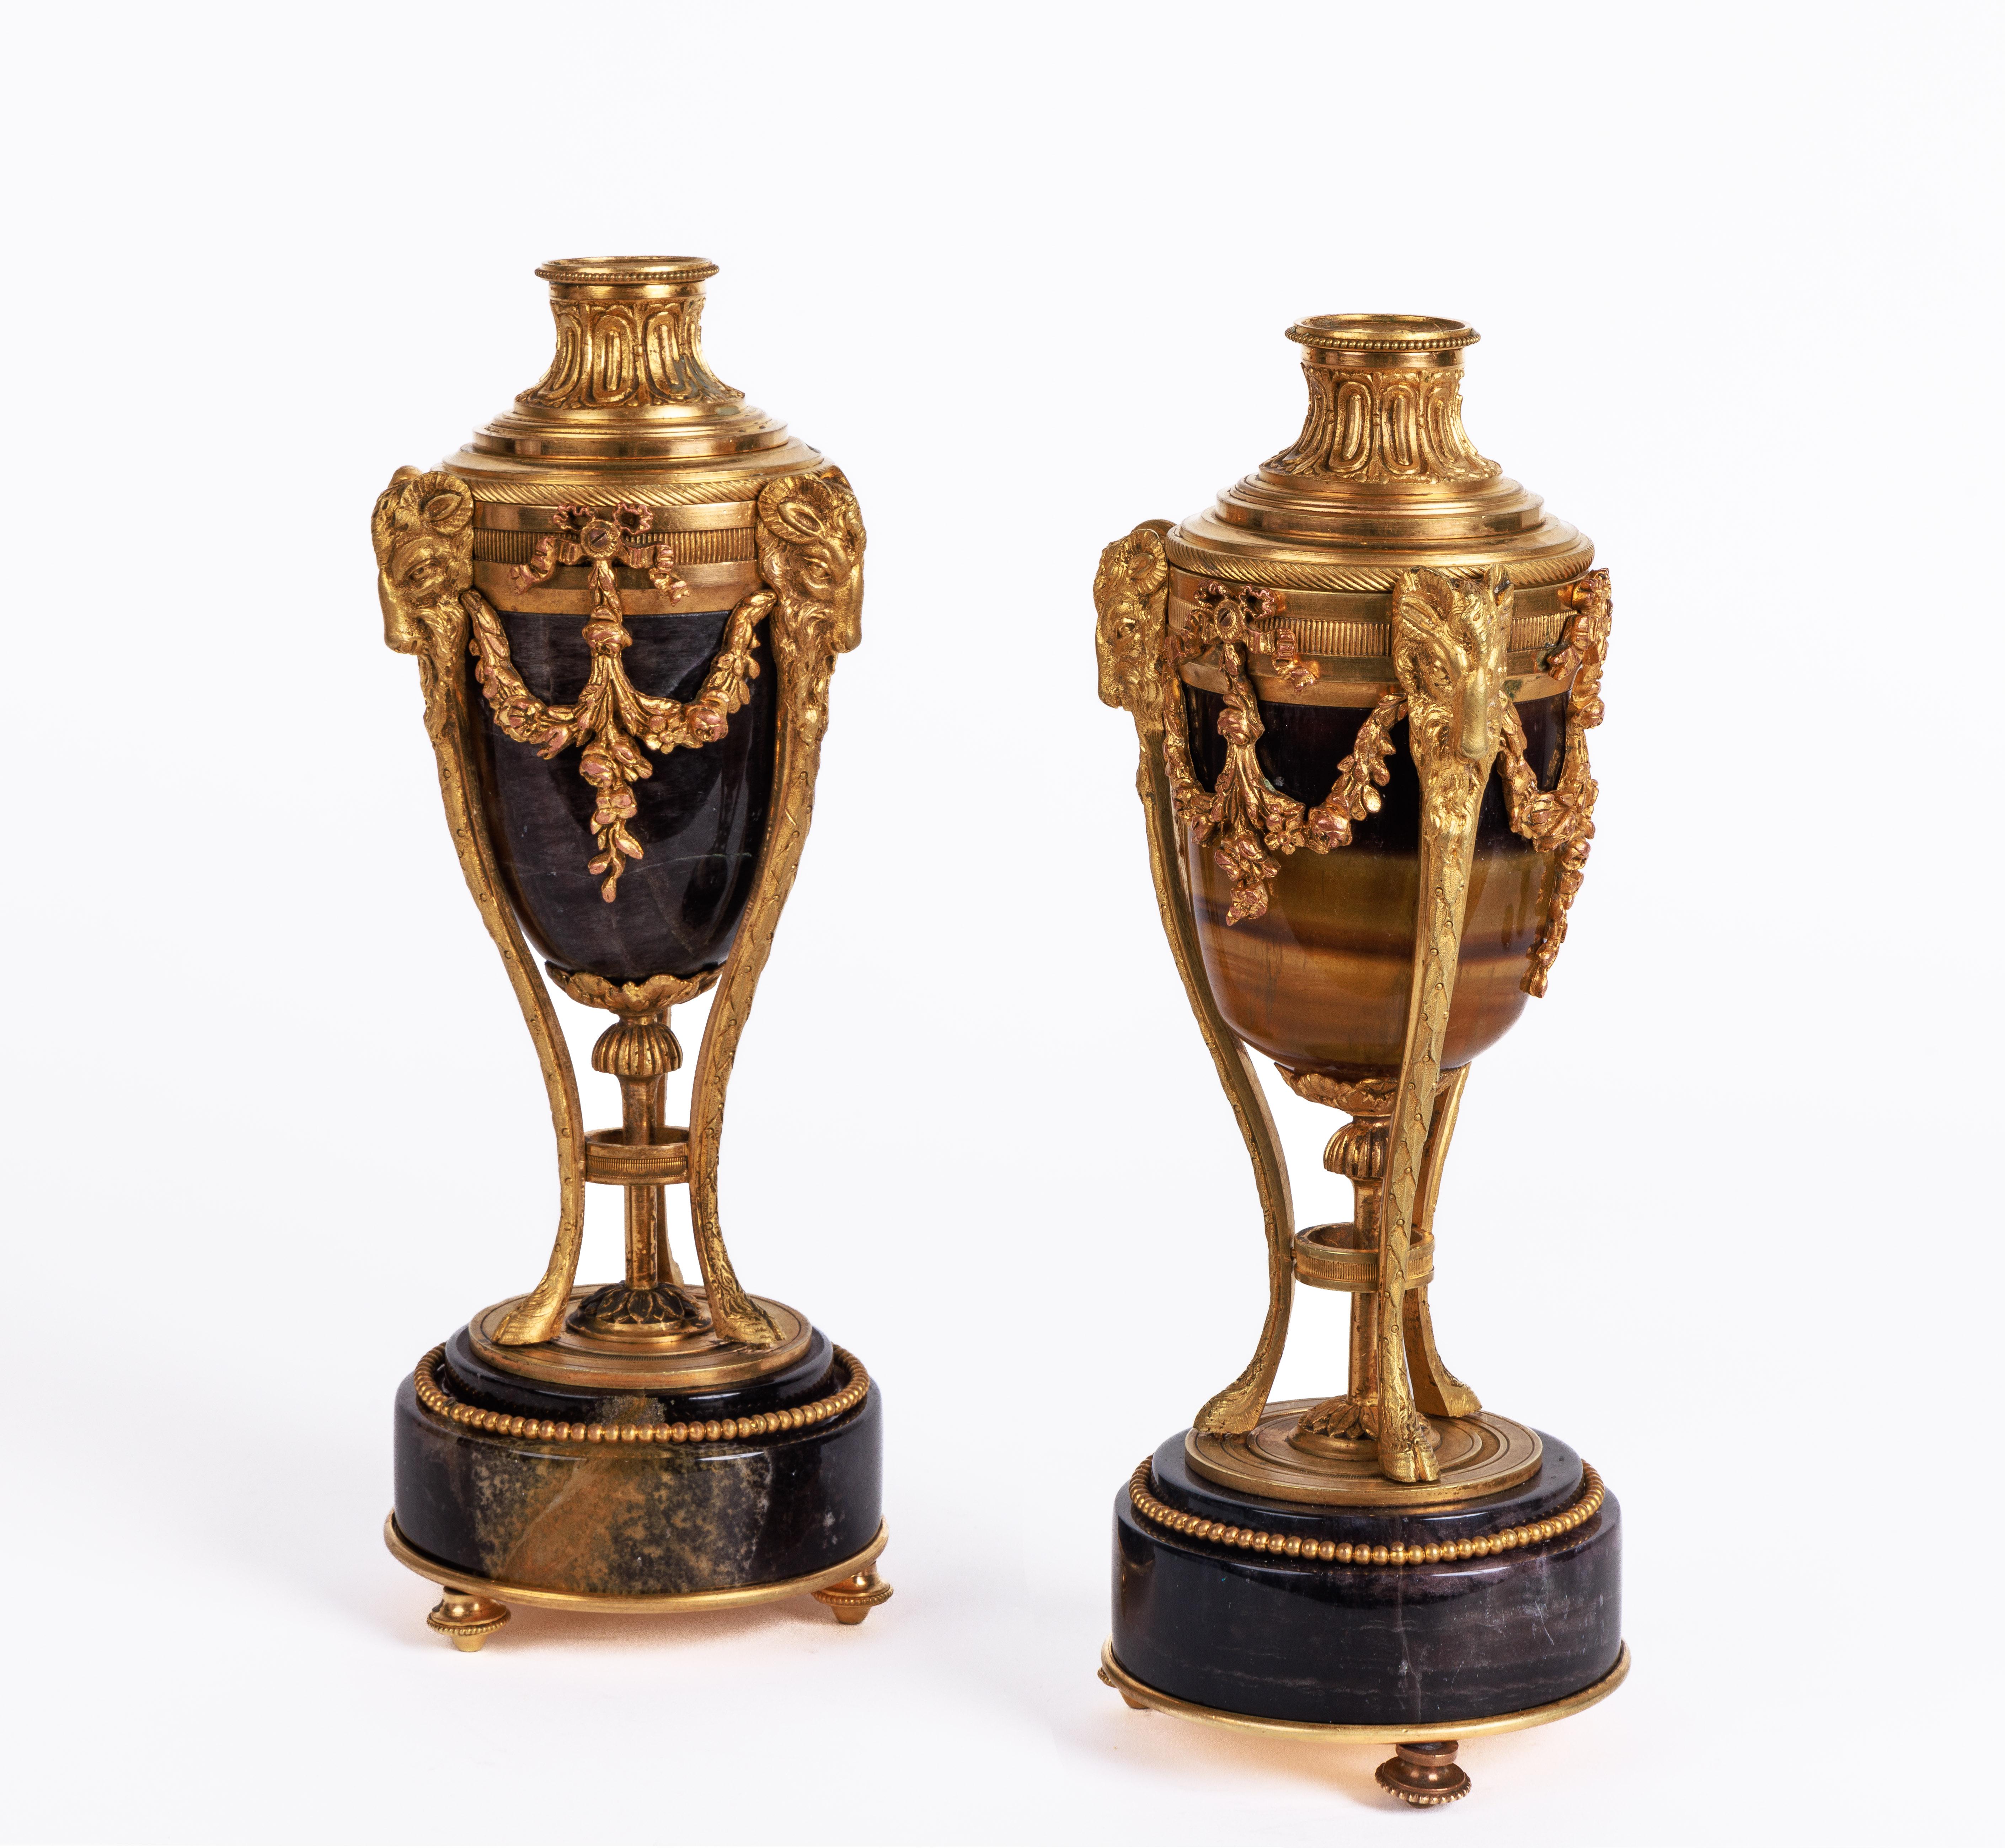 Napoleon III A Rare Pair of French Ormolu-Mounted Blue John Vases Candlesticks, C. 1870 For Sale